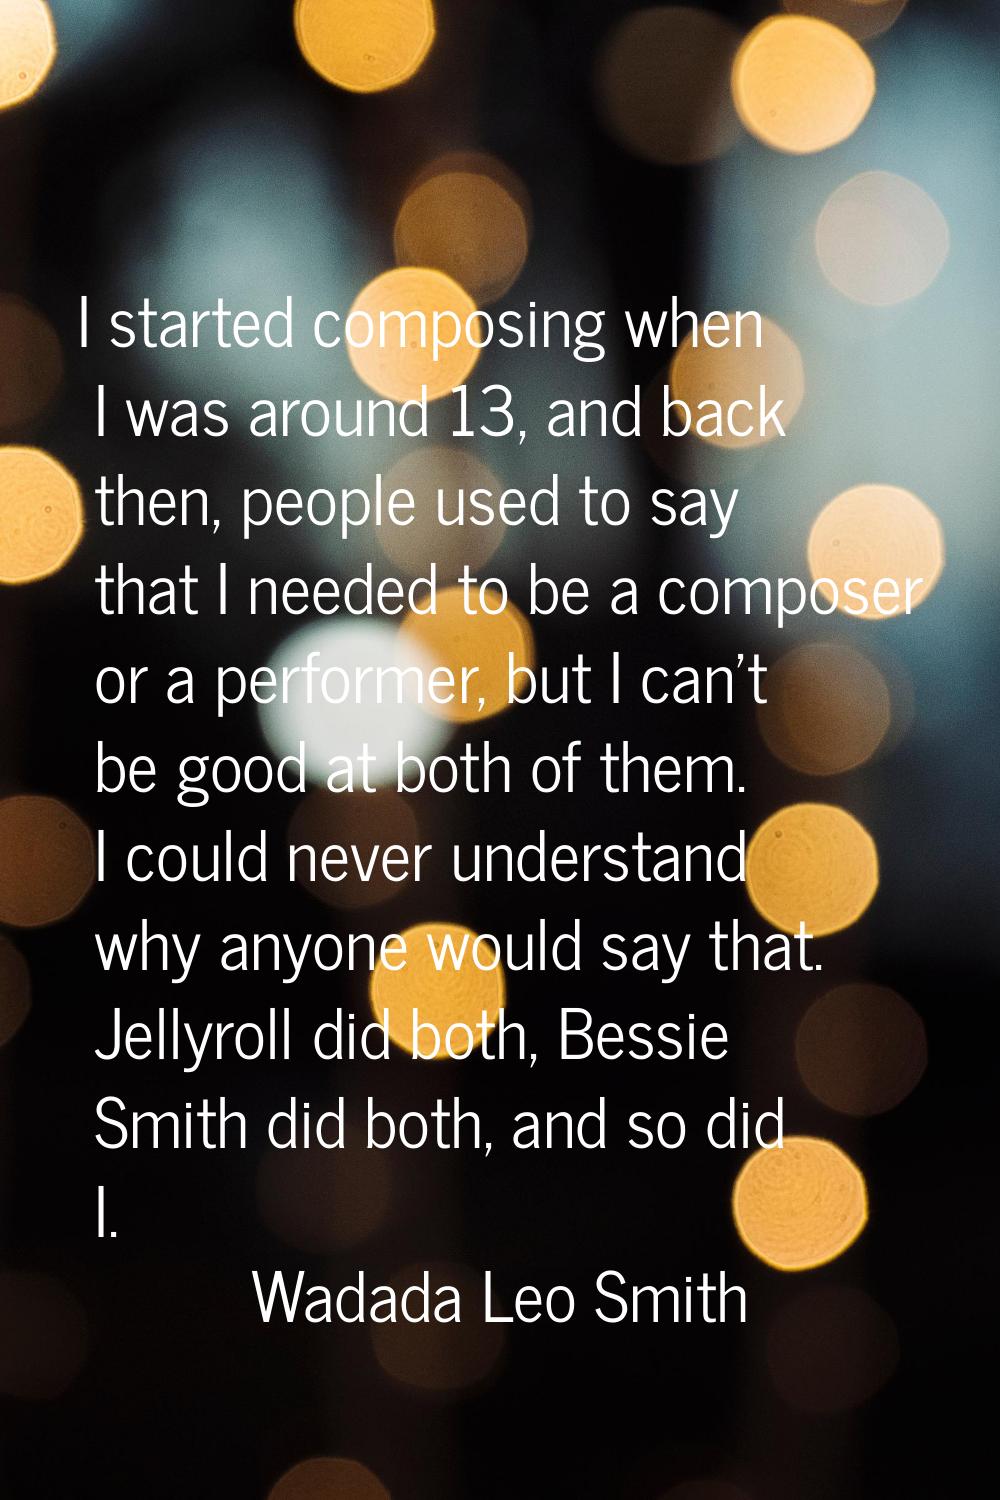 I started composing when I was around 13, and back then, people used to say that I needed to be a c